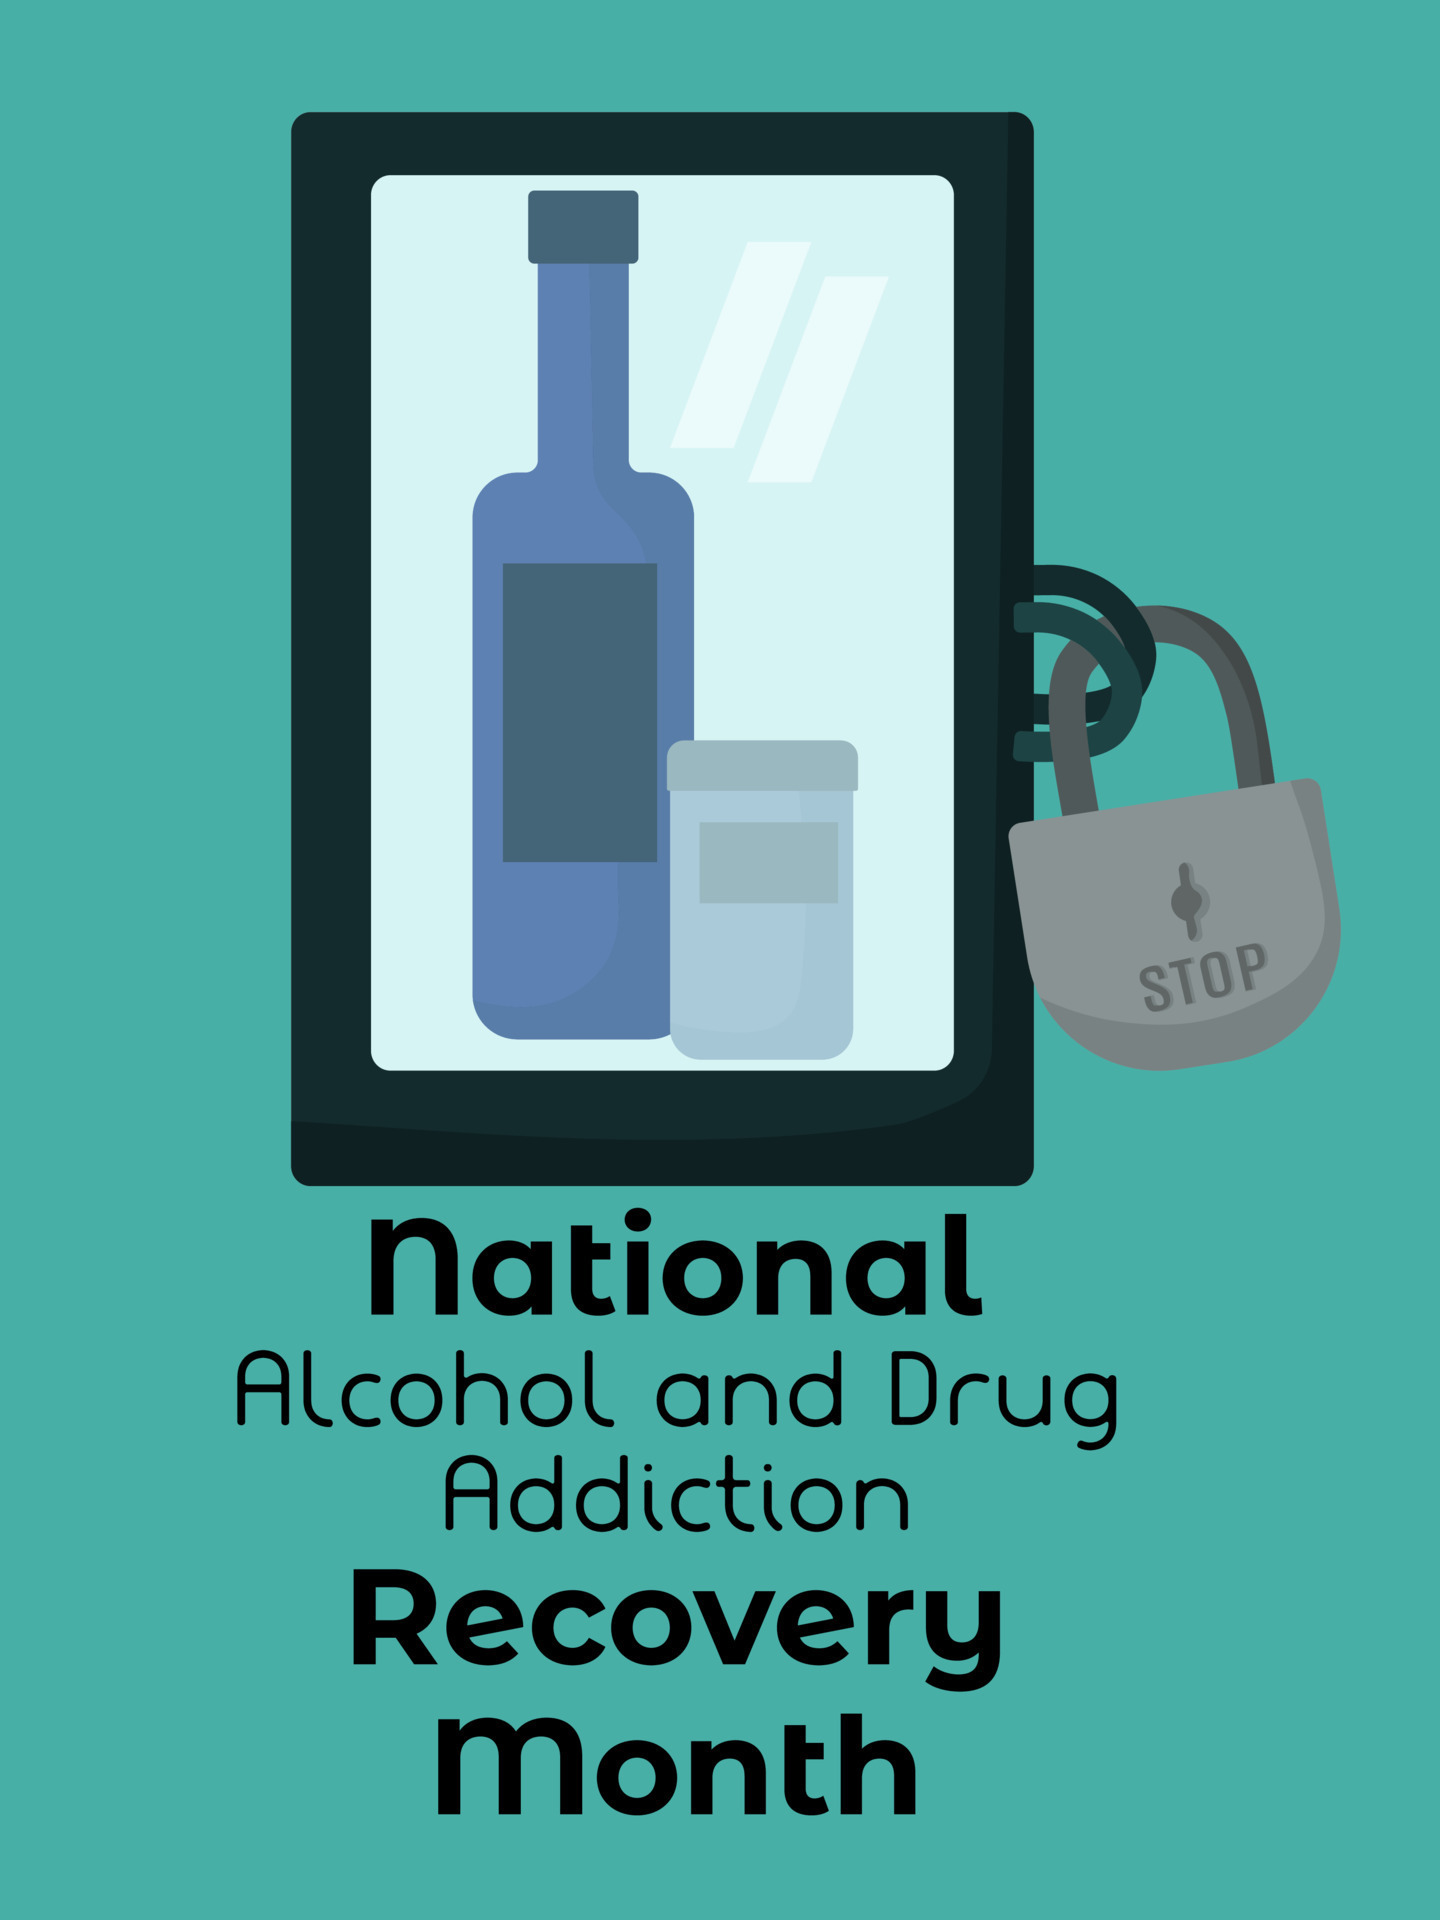 National Alcohol and Drug Addiction Recovery Month, idea for poster